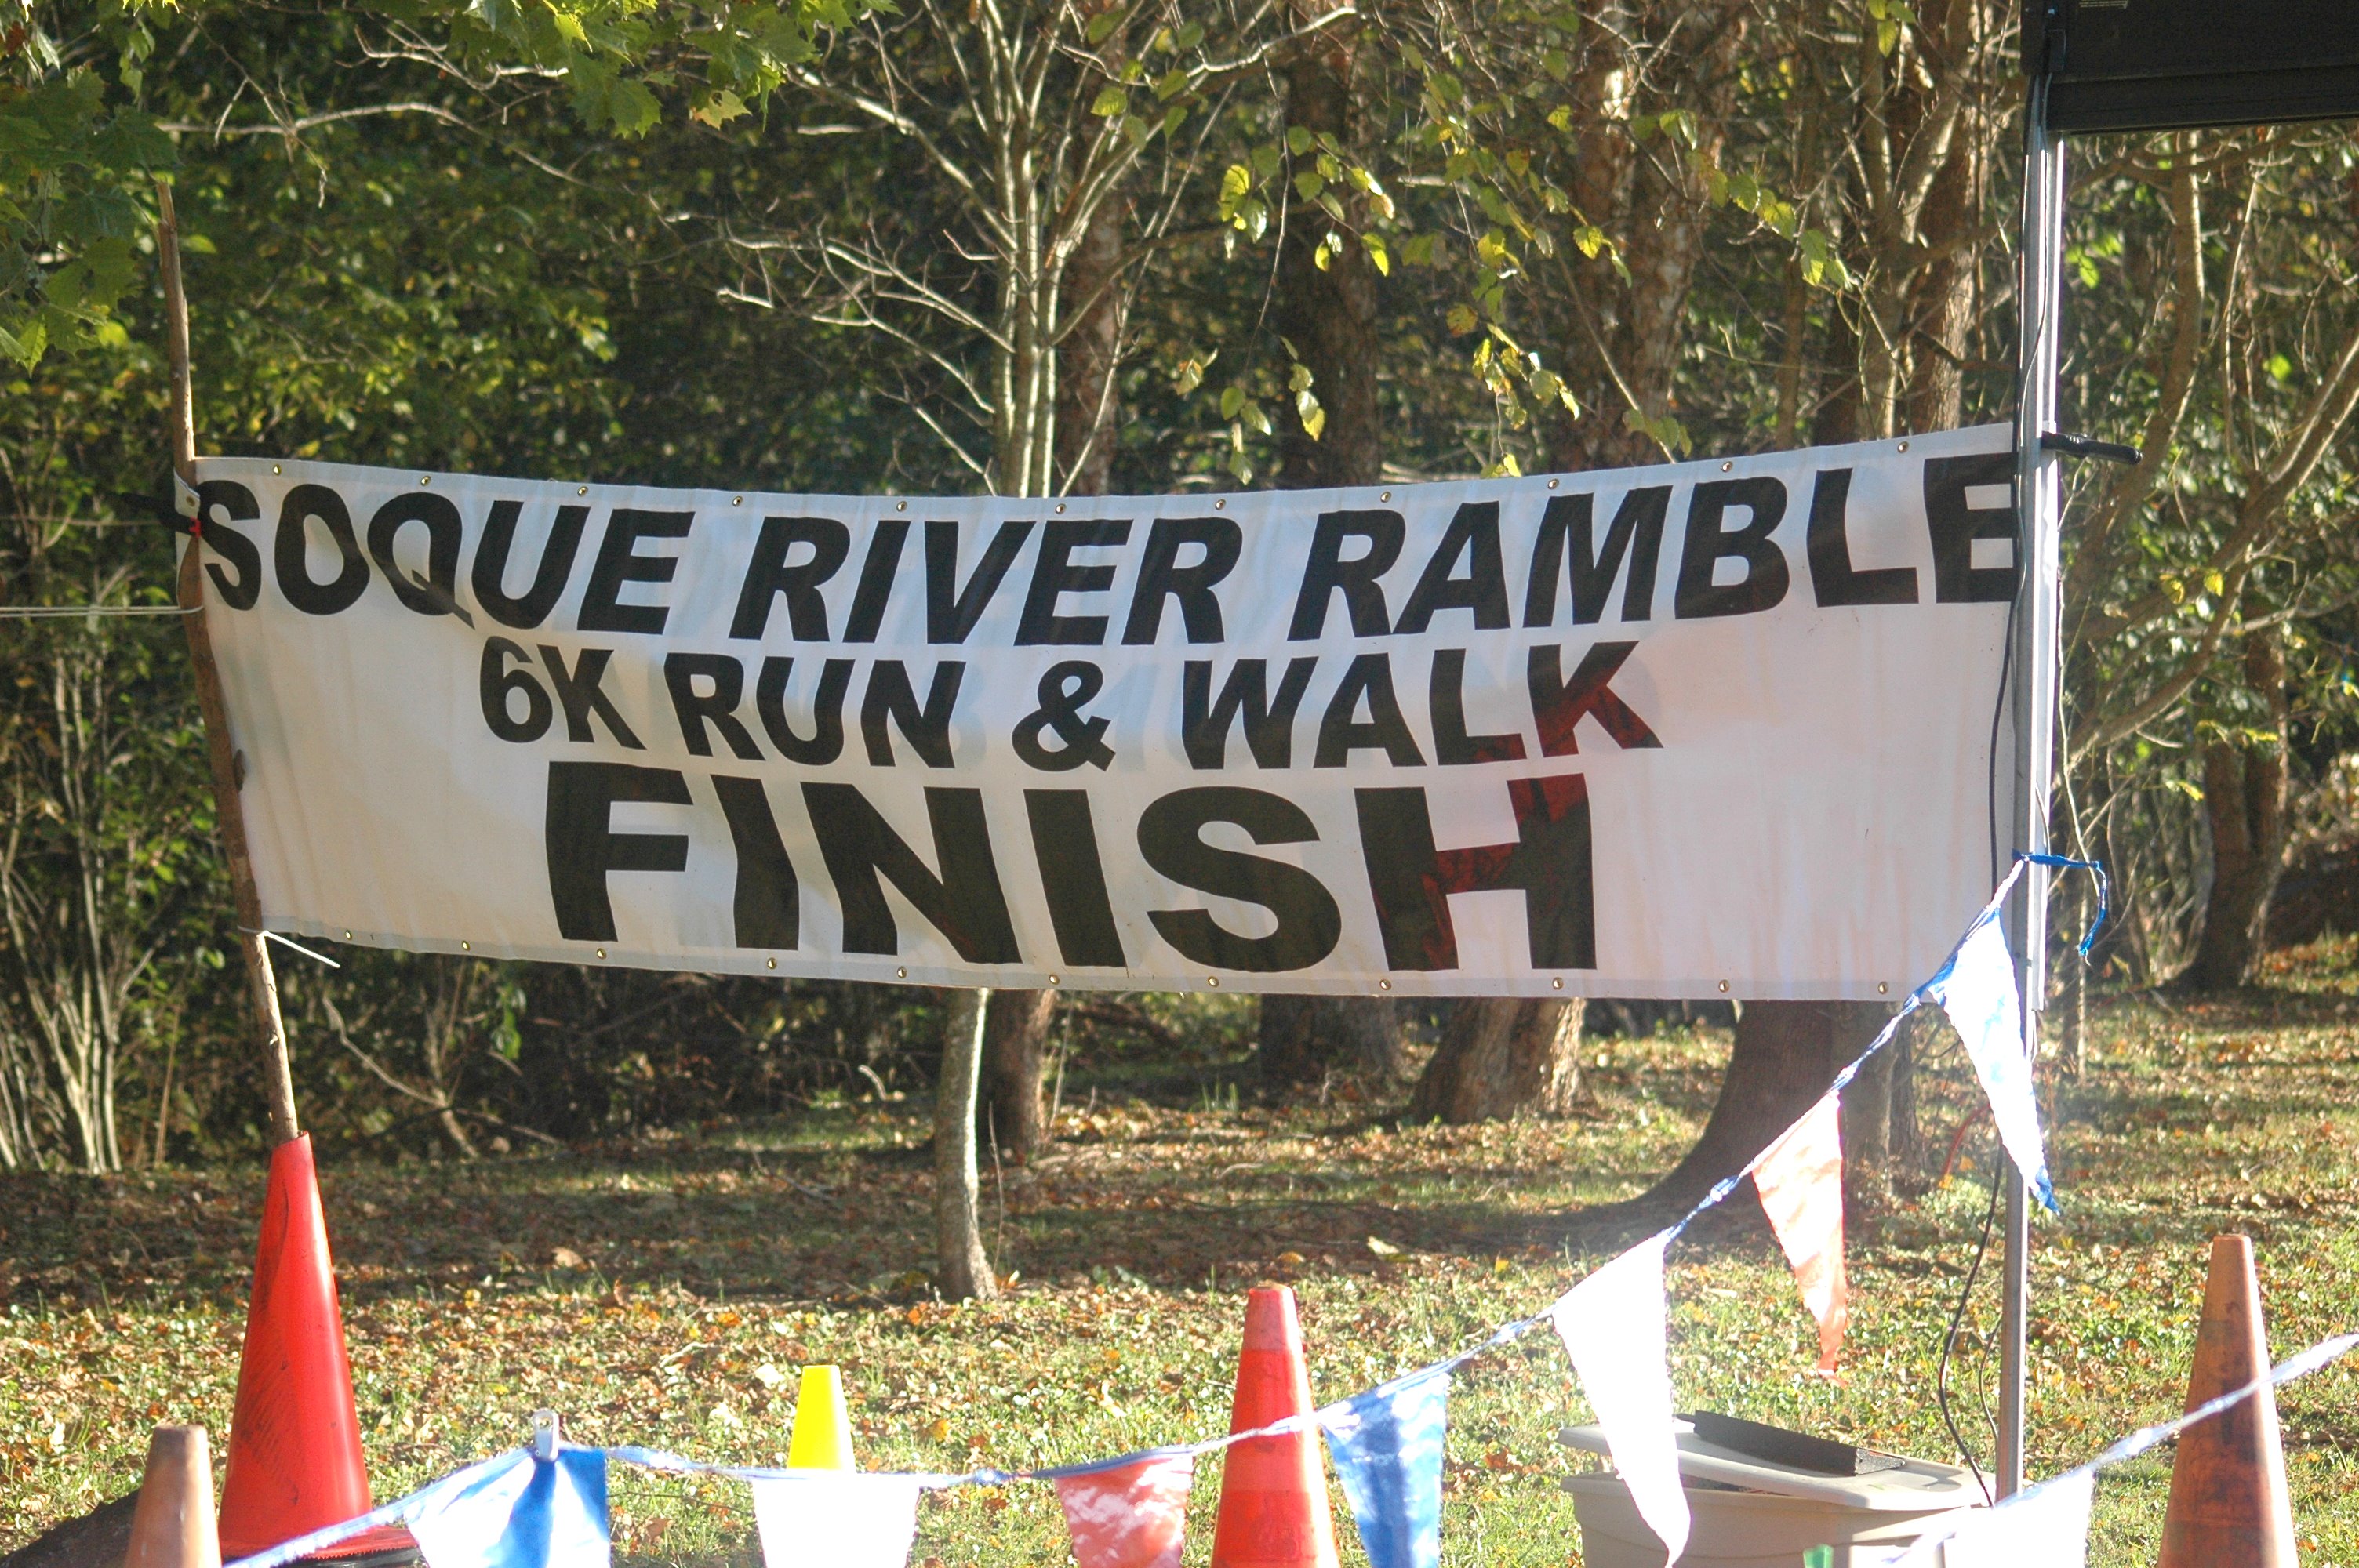 2012 Soque River Ramble is On the Calendar!